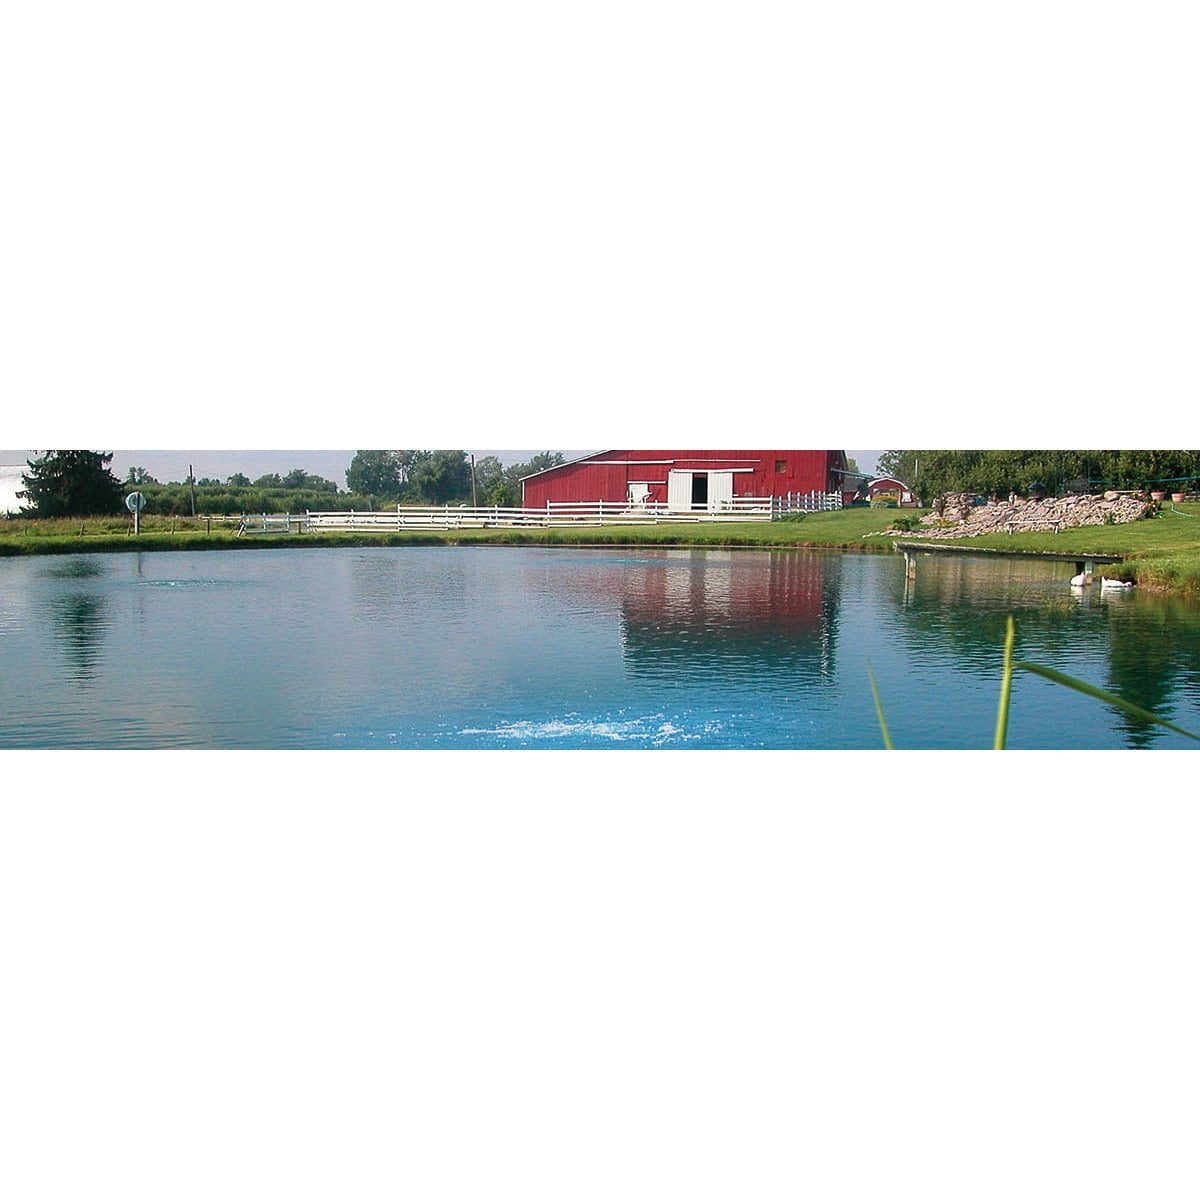 Airmax® PS40 3 Acre Pond Aerator - American Pond Supplies Airmax® Bottom-Diffused Pond Aerators Bottom-Diffused Pond Aerators